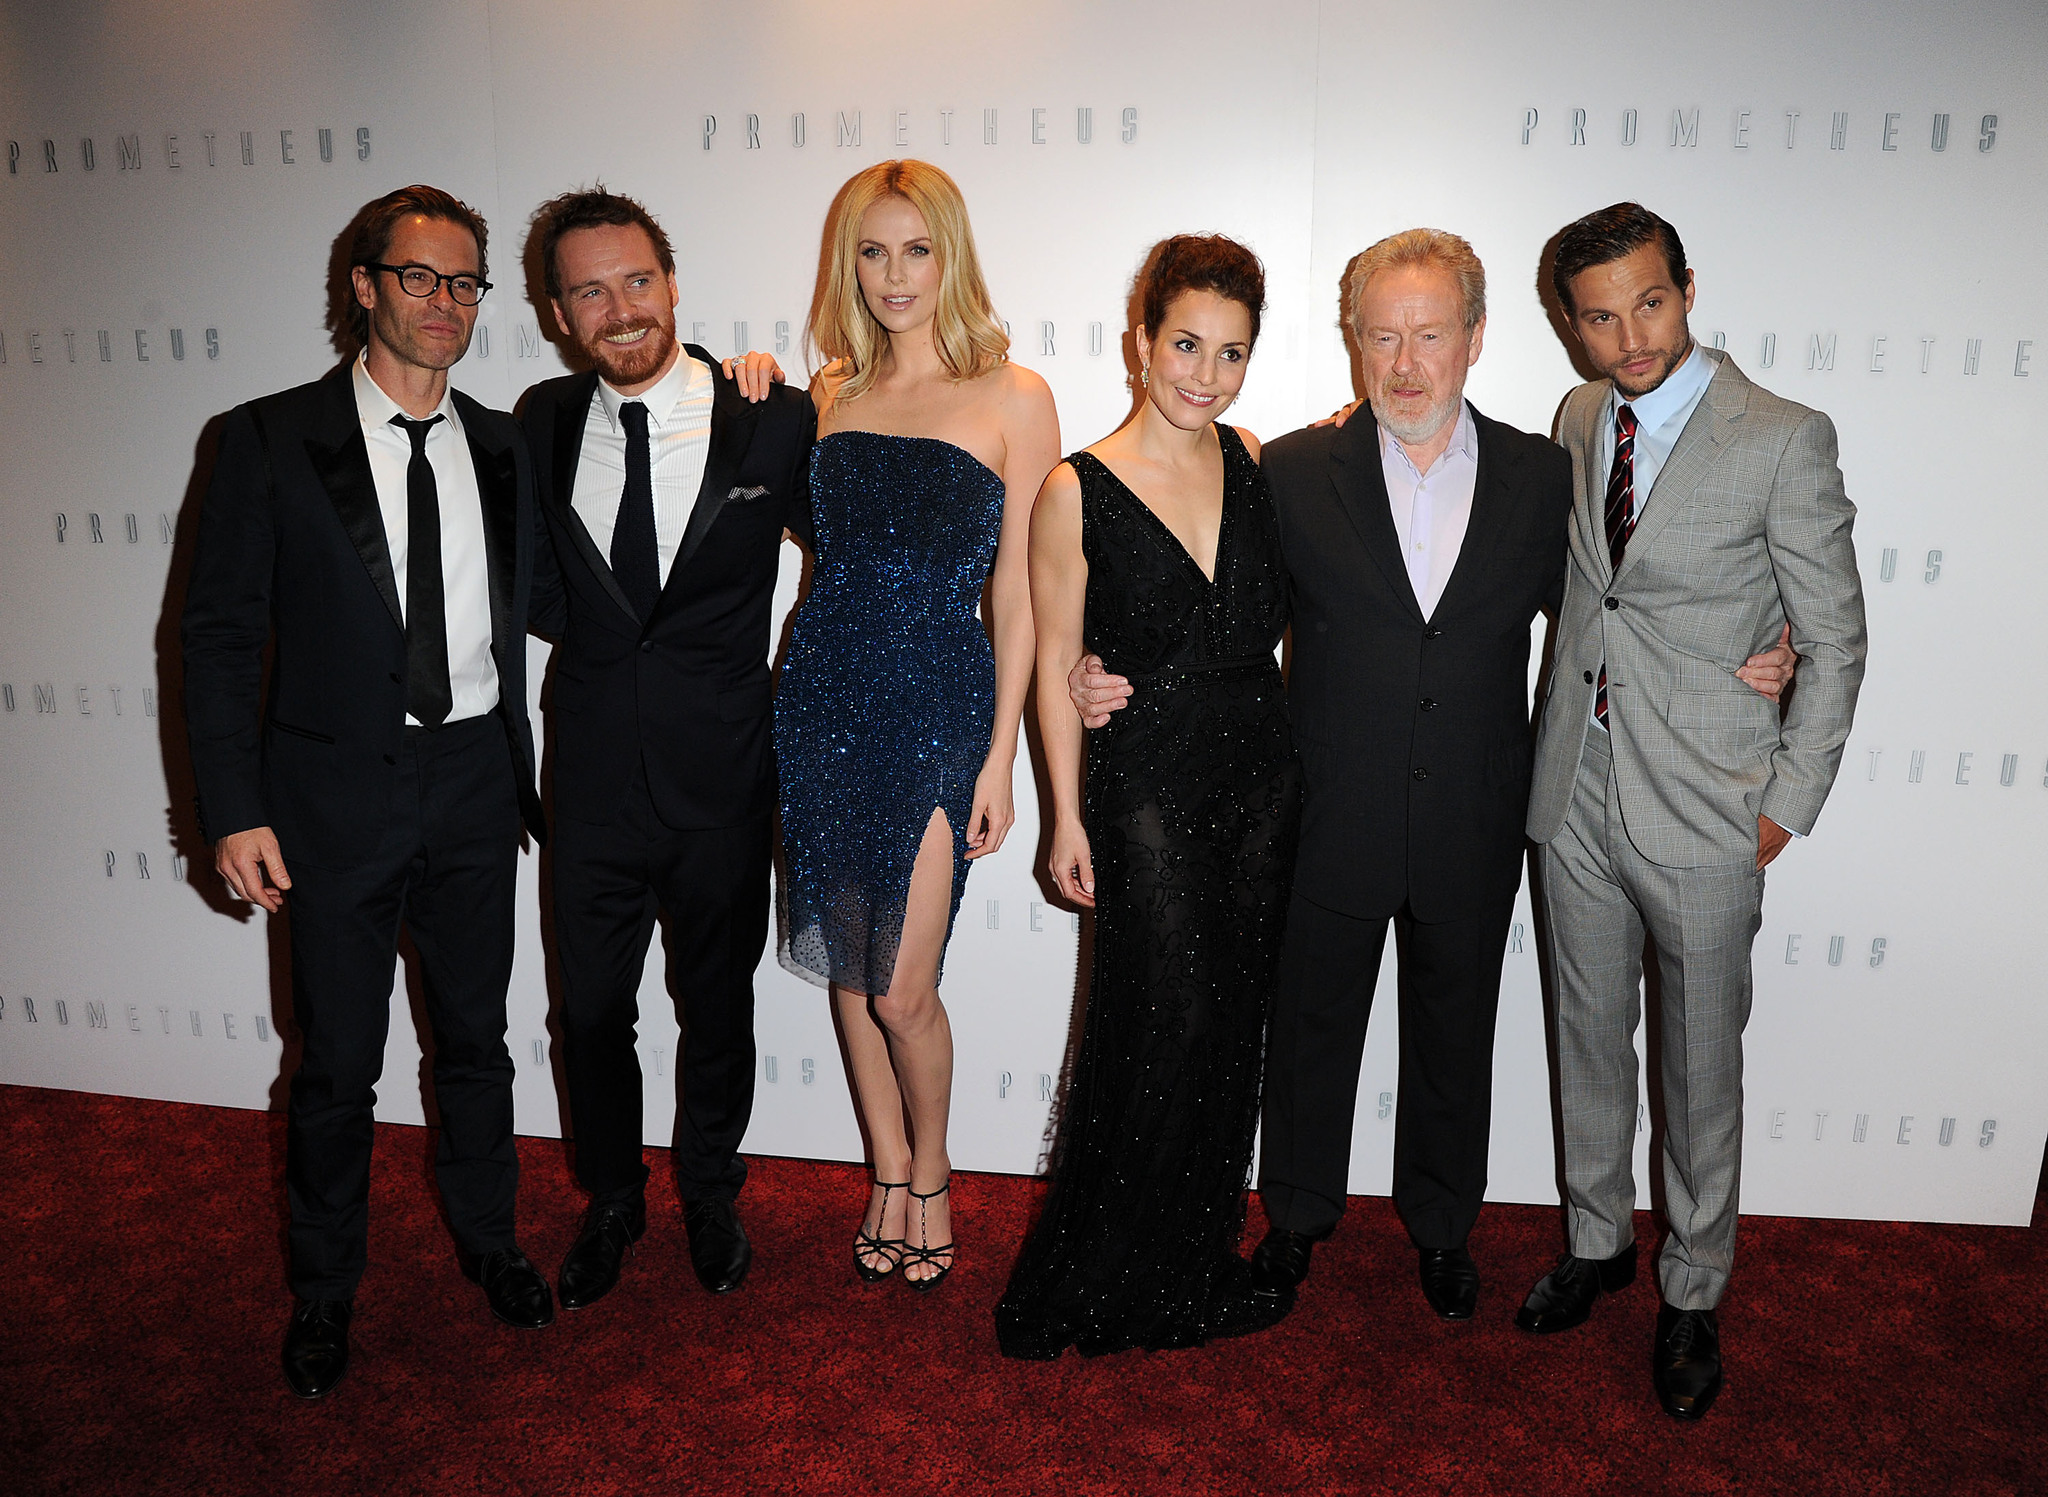 Charlize Theron, Ridley Scott, Guy Pearce, Noomi Rapace, Michael Fassbender and Logan Marshall-Green at event of Prometejas (2012)